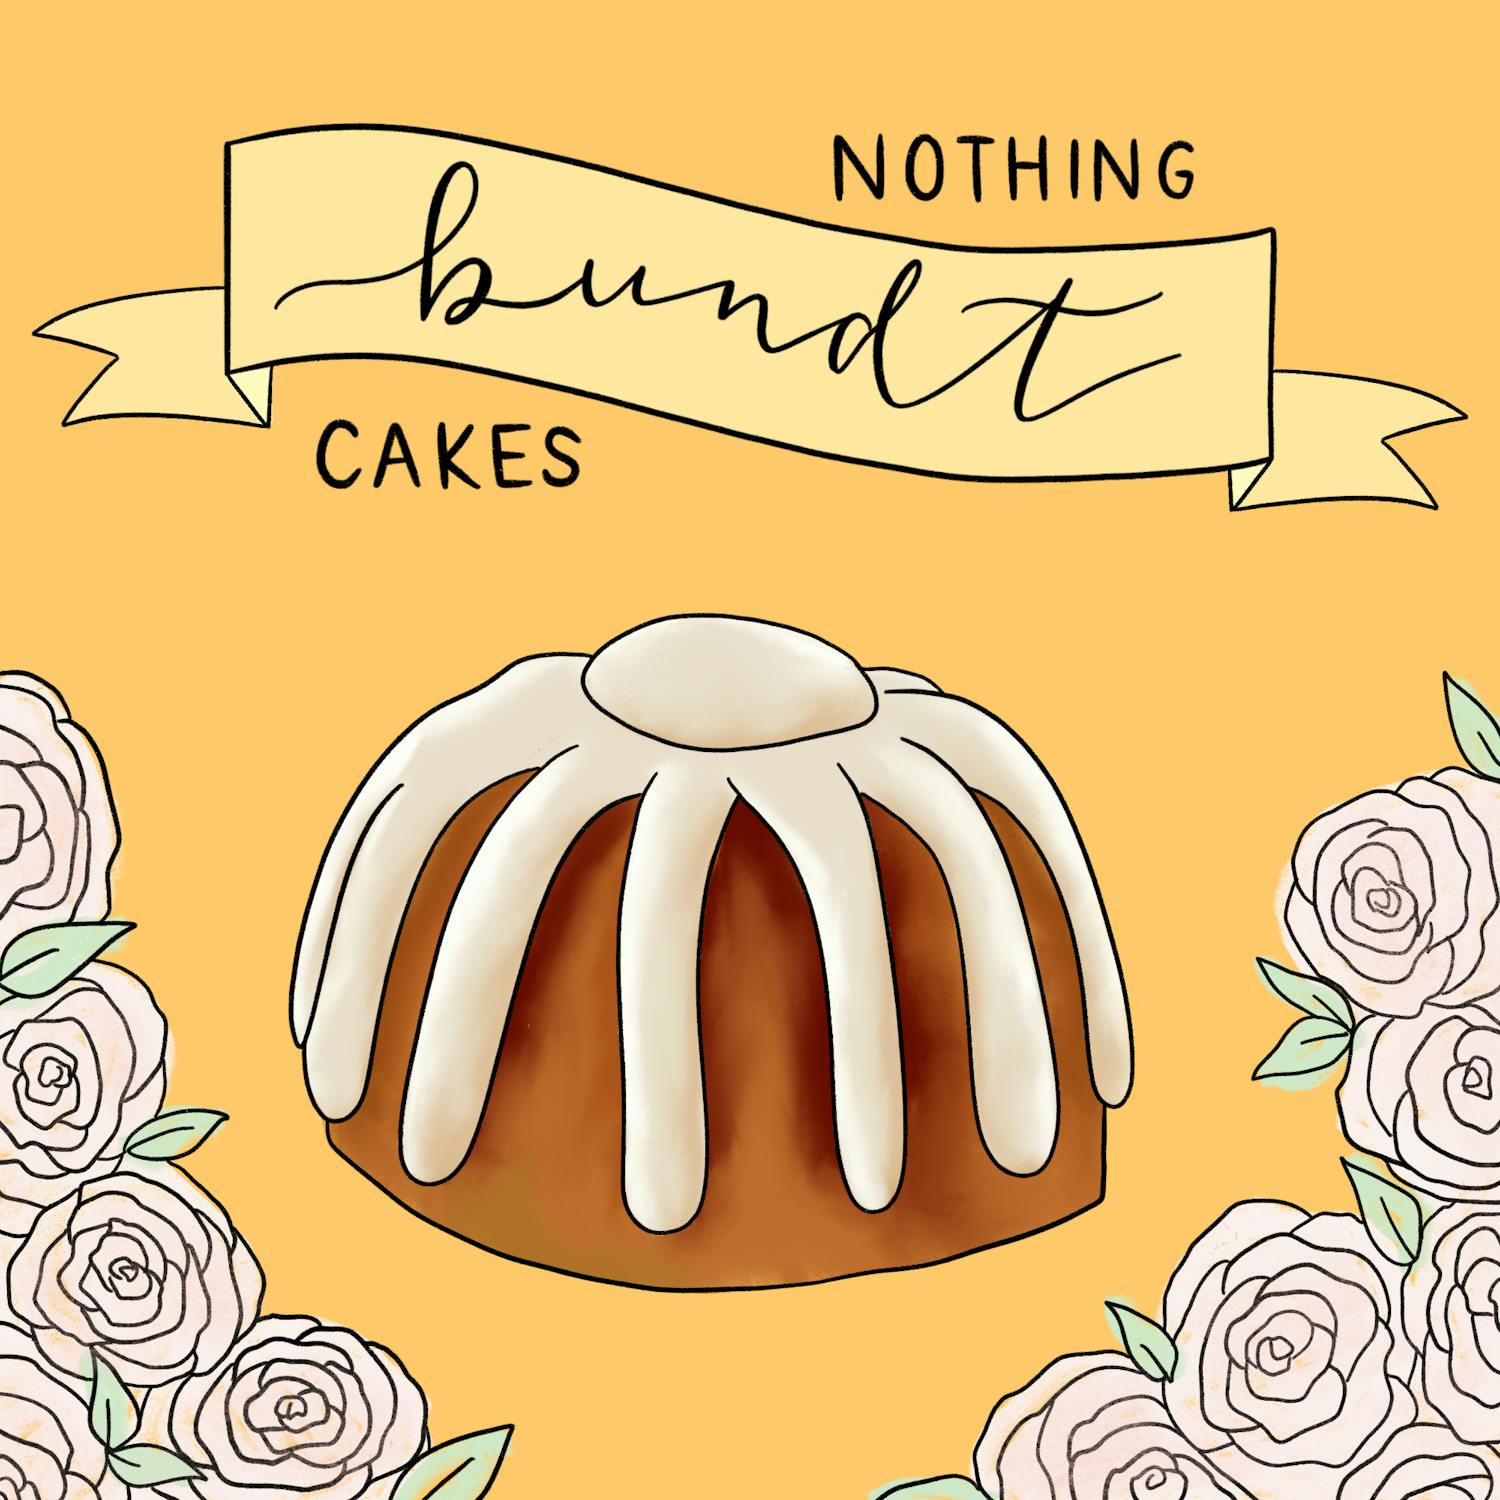 nothing bundt cakes tallahassee fl 32301